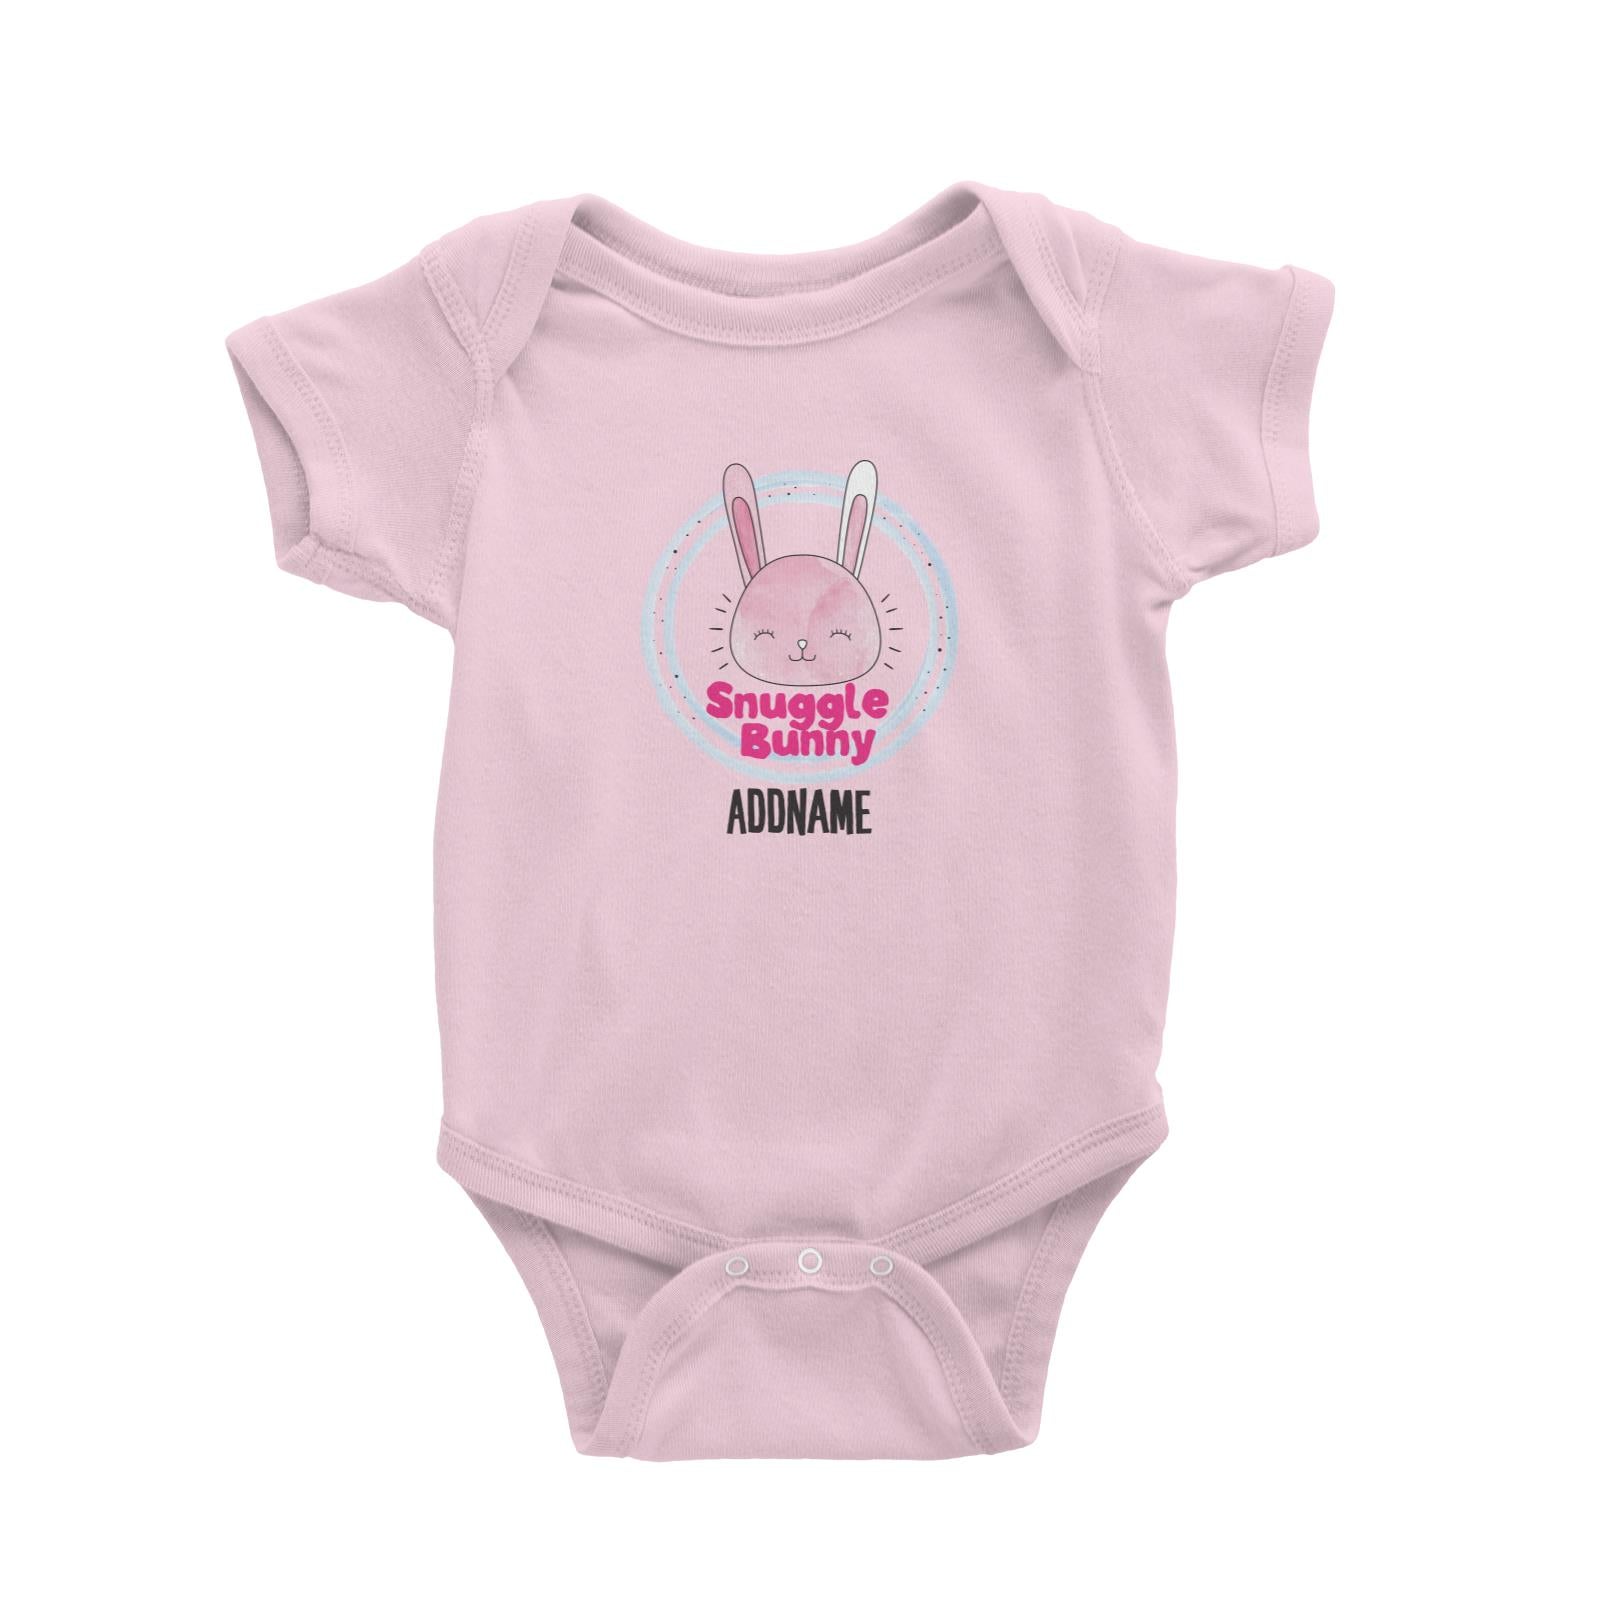 Cool Vibrant Series Snuggle Bunny Addname Baby Romper